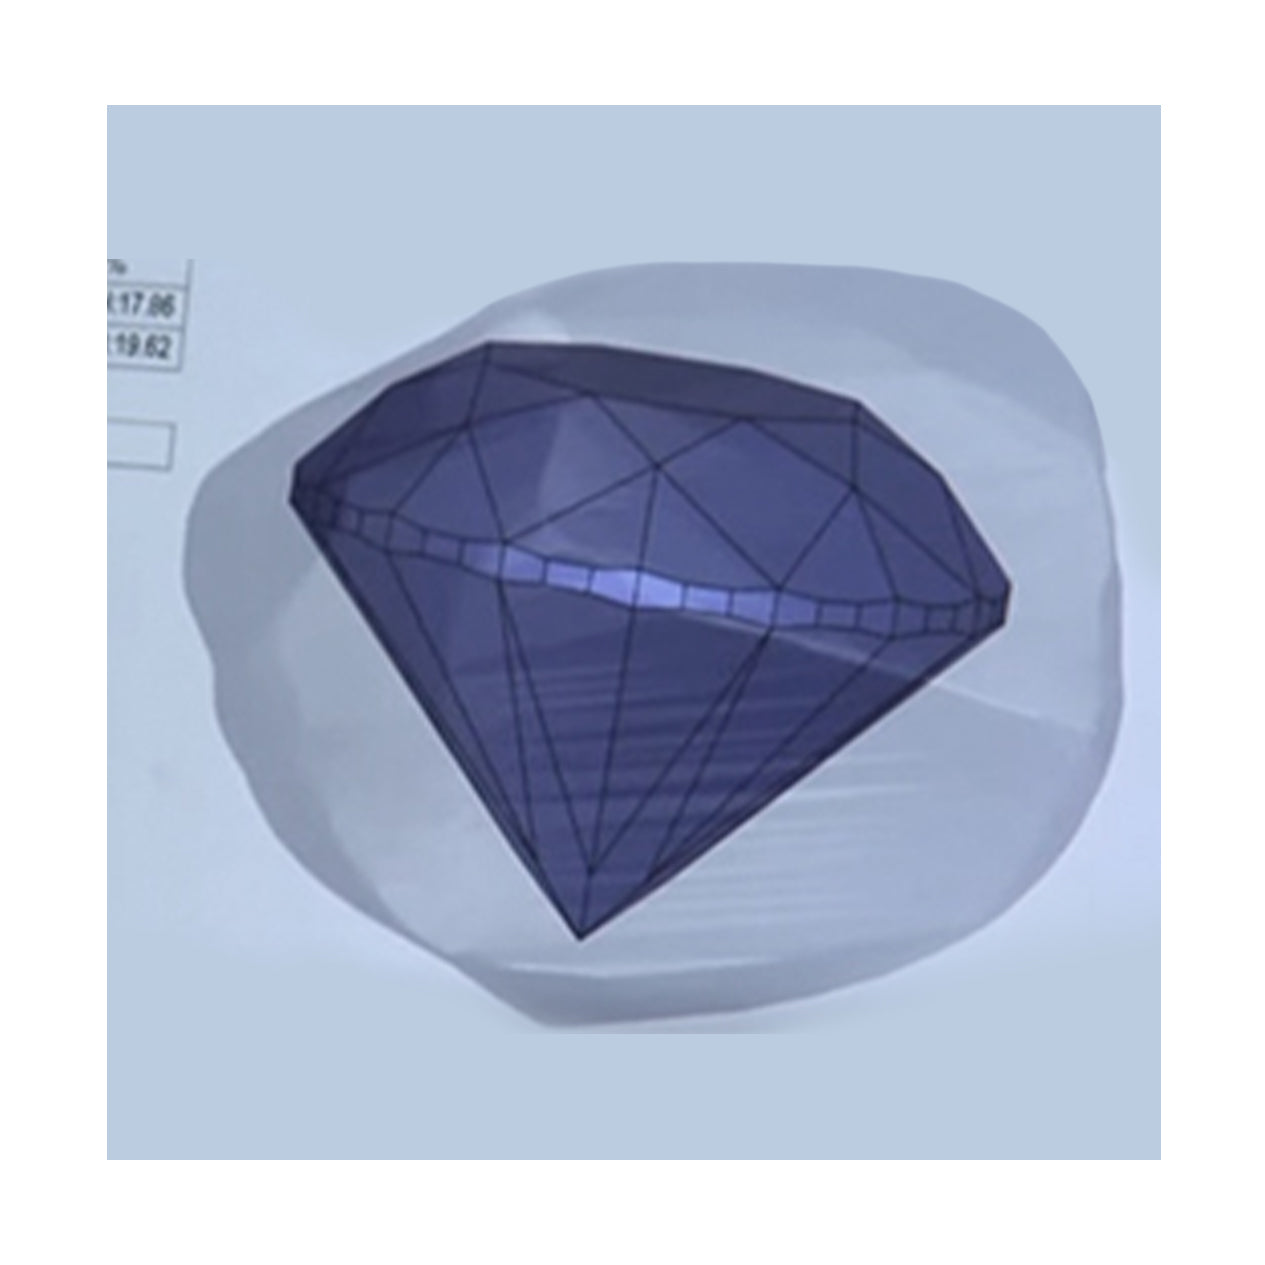 Vital step in the diamond cutting and polishing process is the analysis of the rough diamond